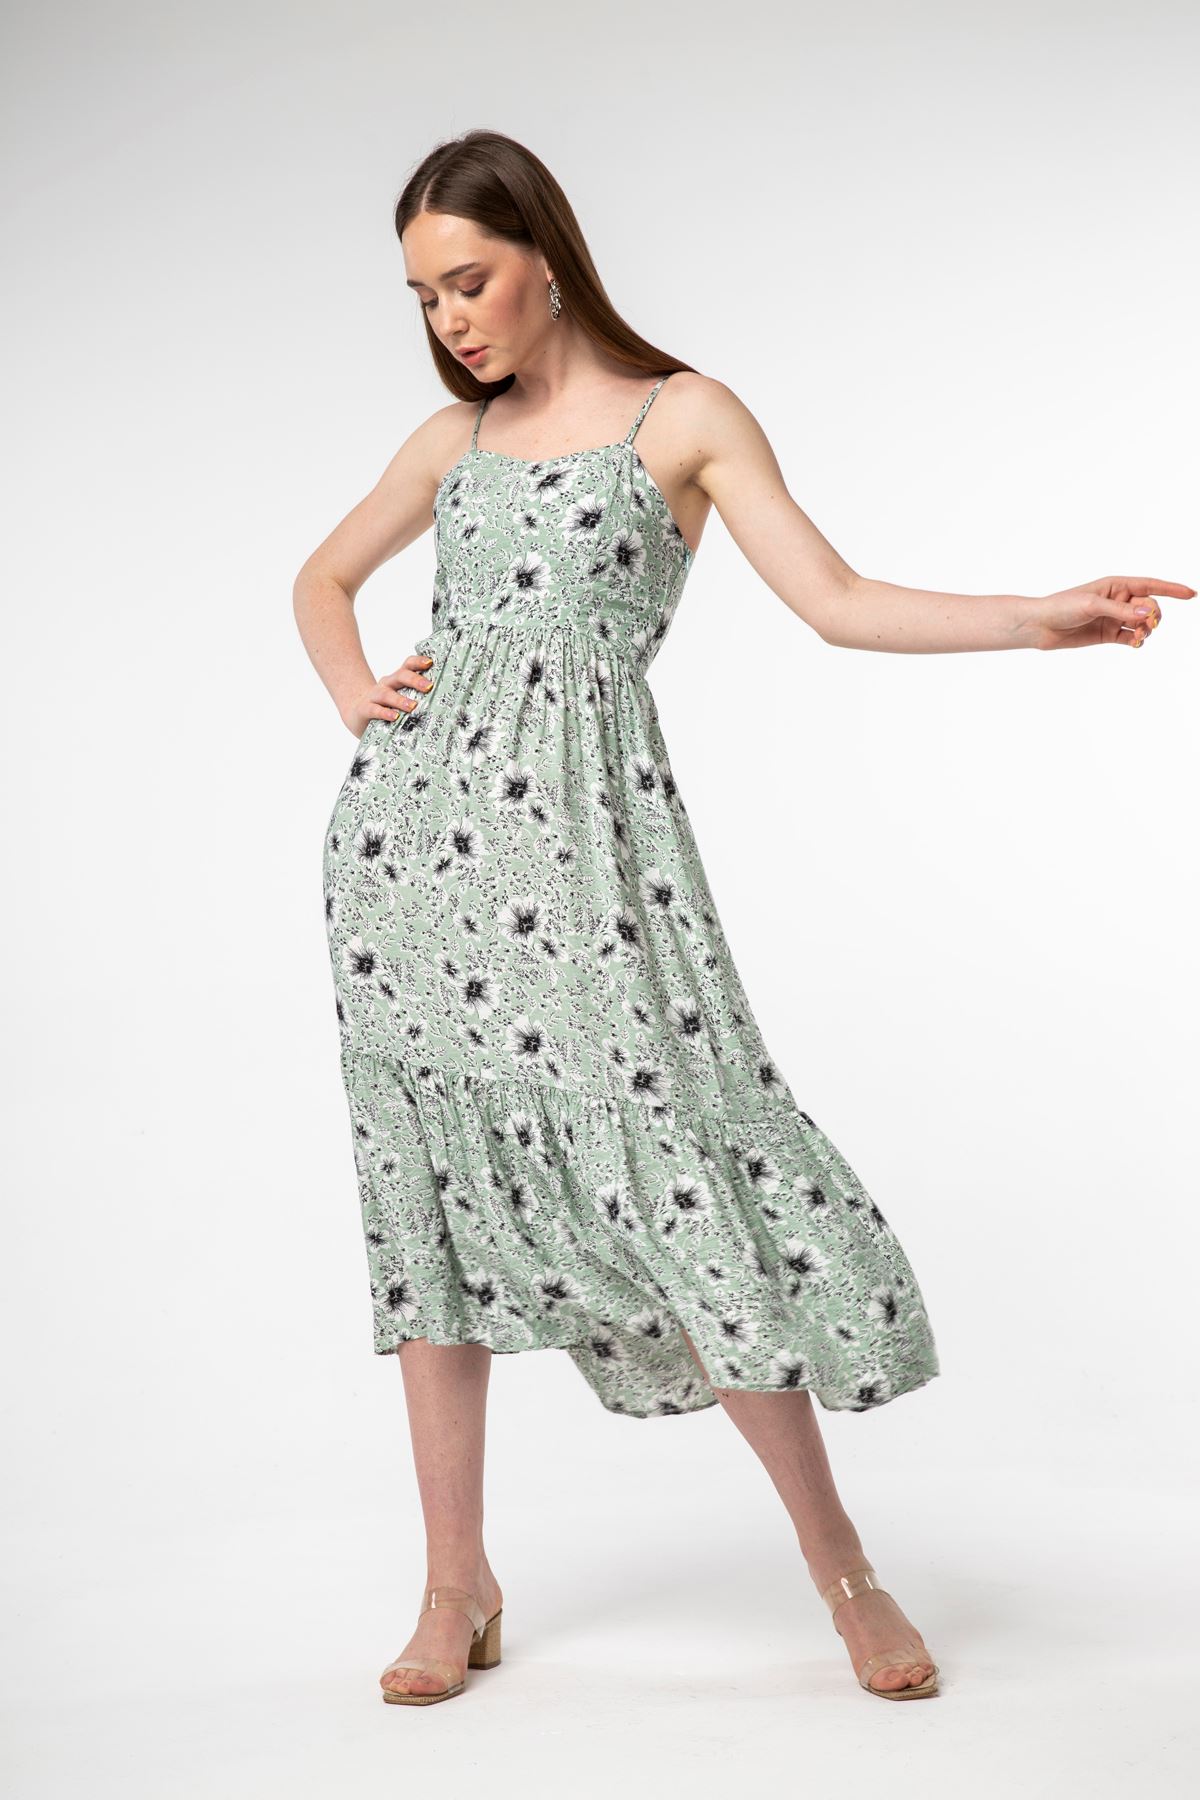 Brocade Fabric Straped Floral Print Hanging Rope Women Dress - Mint